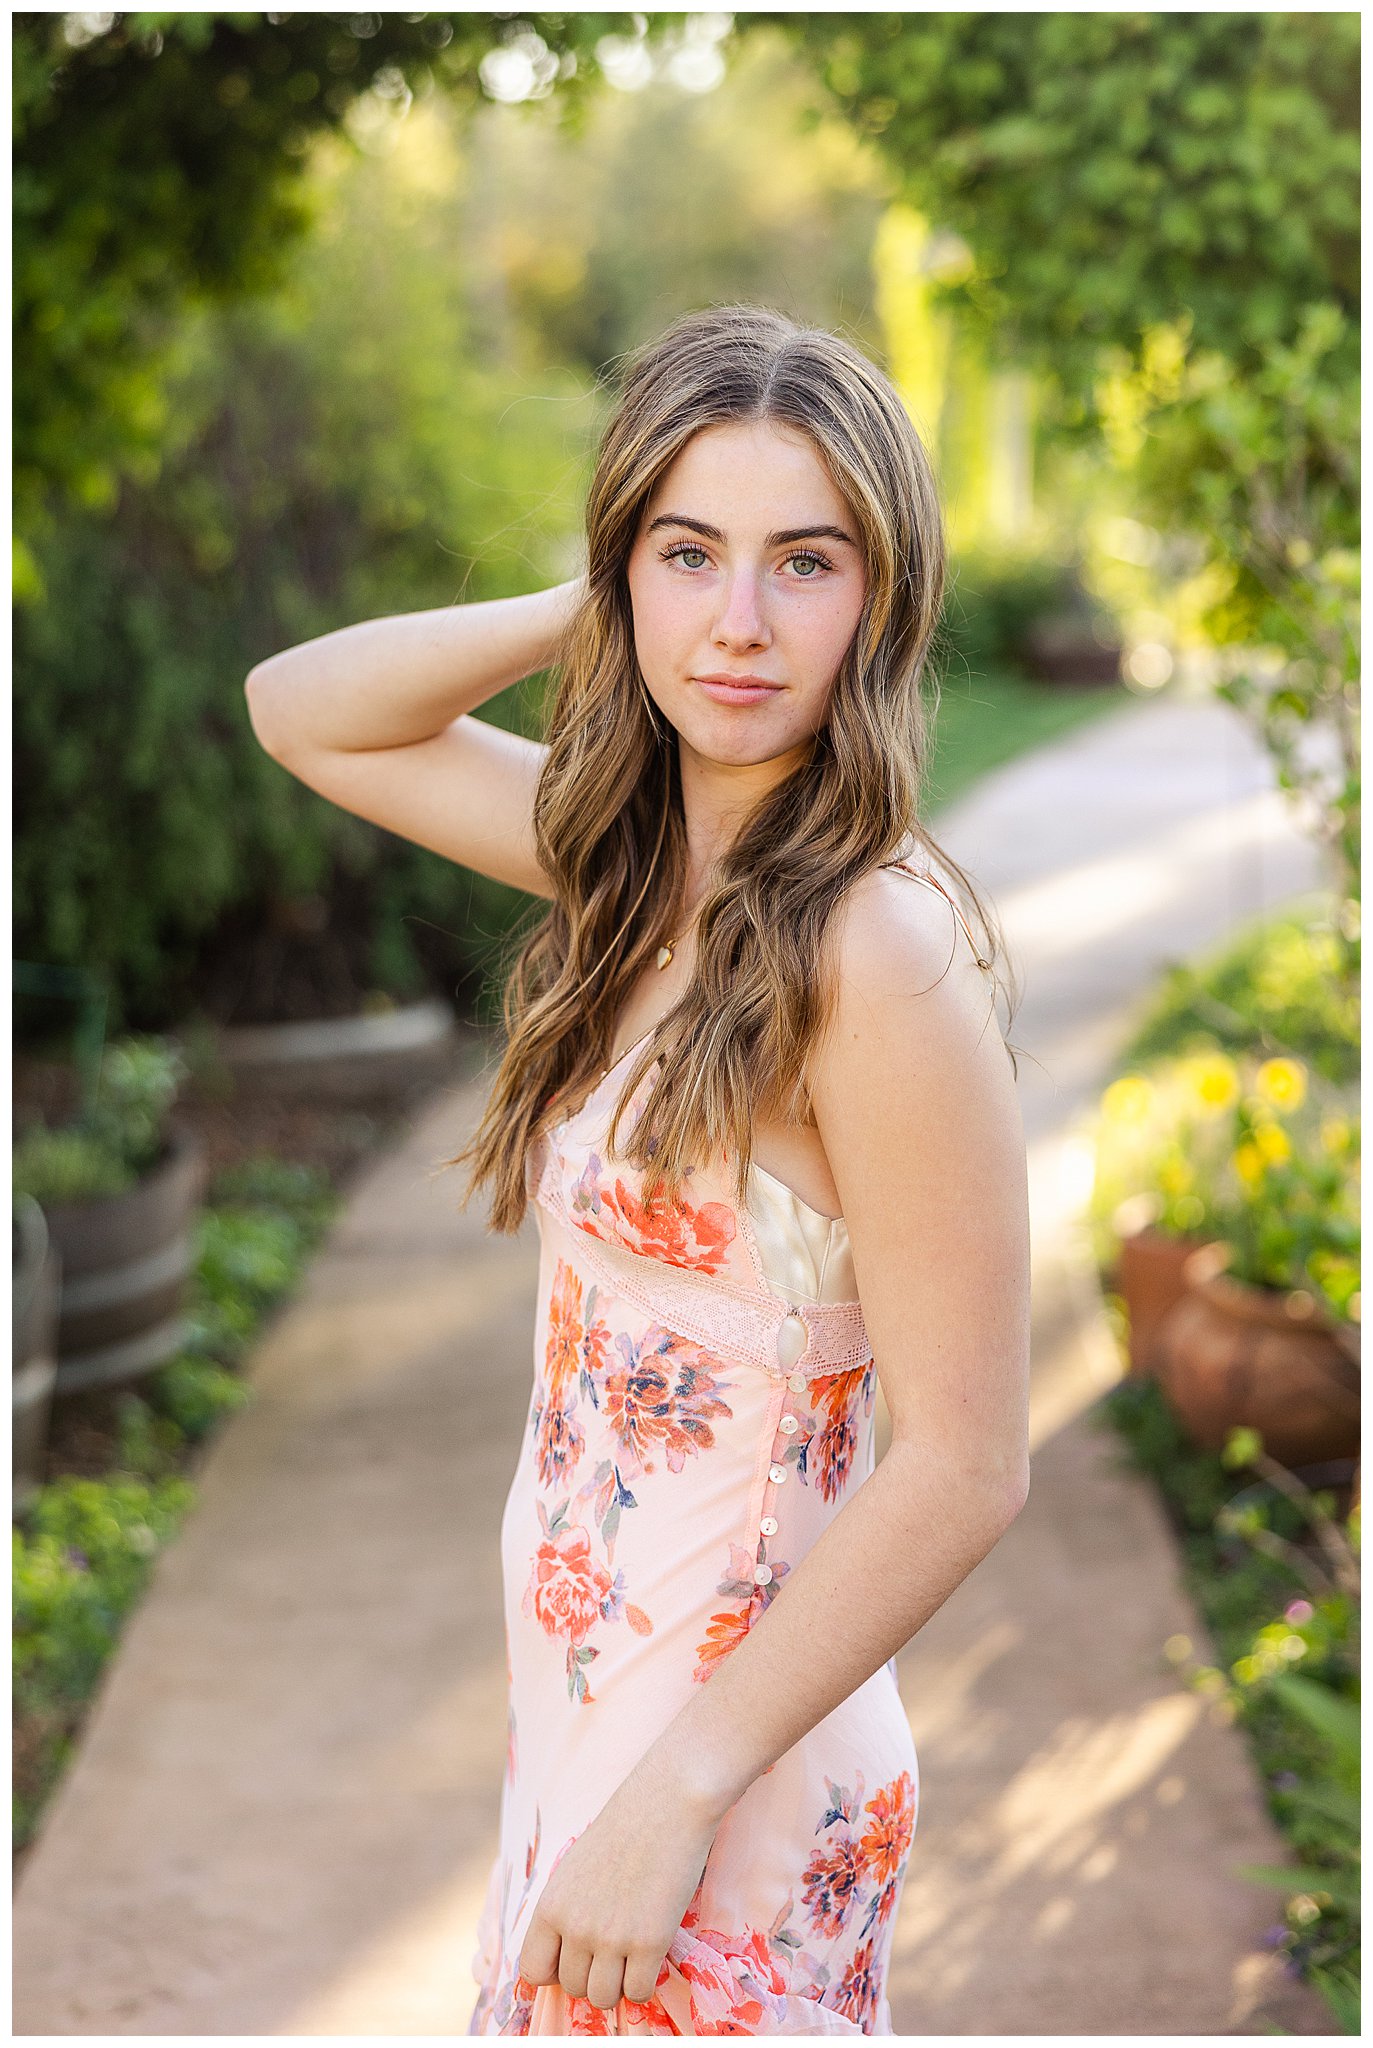 White Ranch Events High School Senior Session Chico CA Willow Tree Field Overalls Floral Dress Arch,